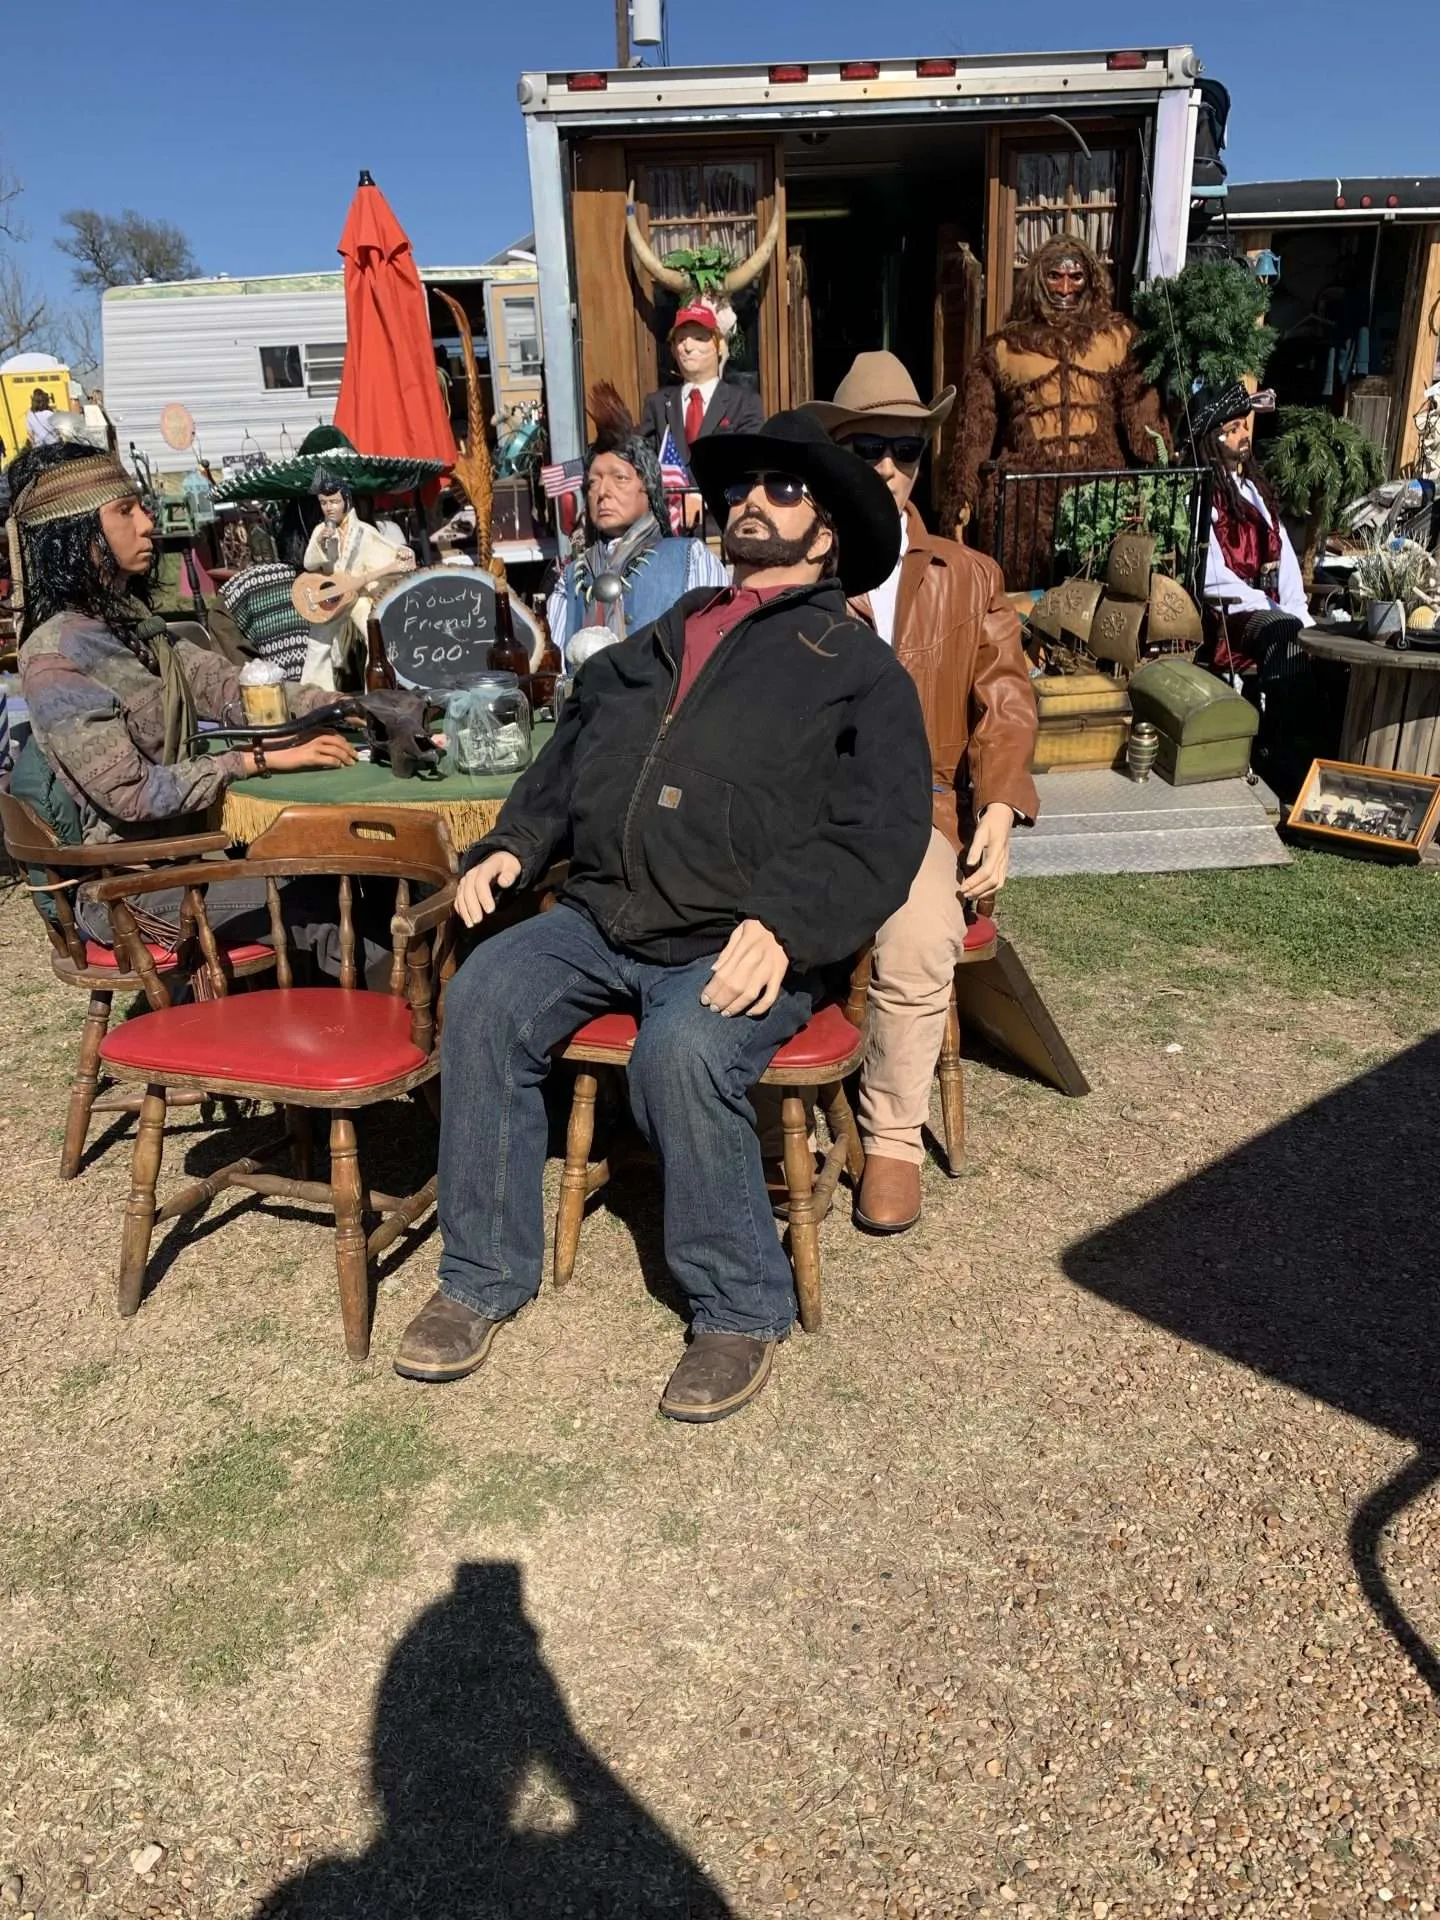 Mannequin dressed up to look like Yellowstone character Rip at the fields in Warrenton, Texas during the Round Top Antique Show.